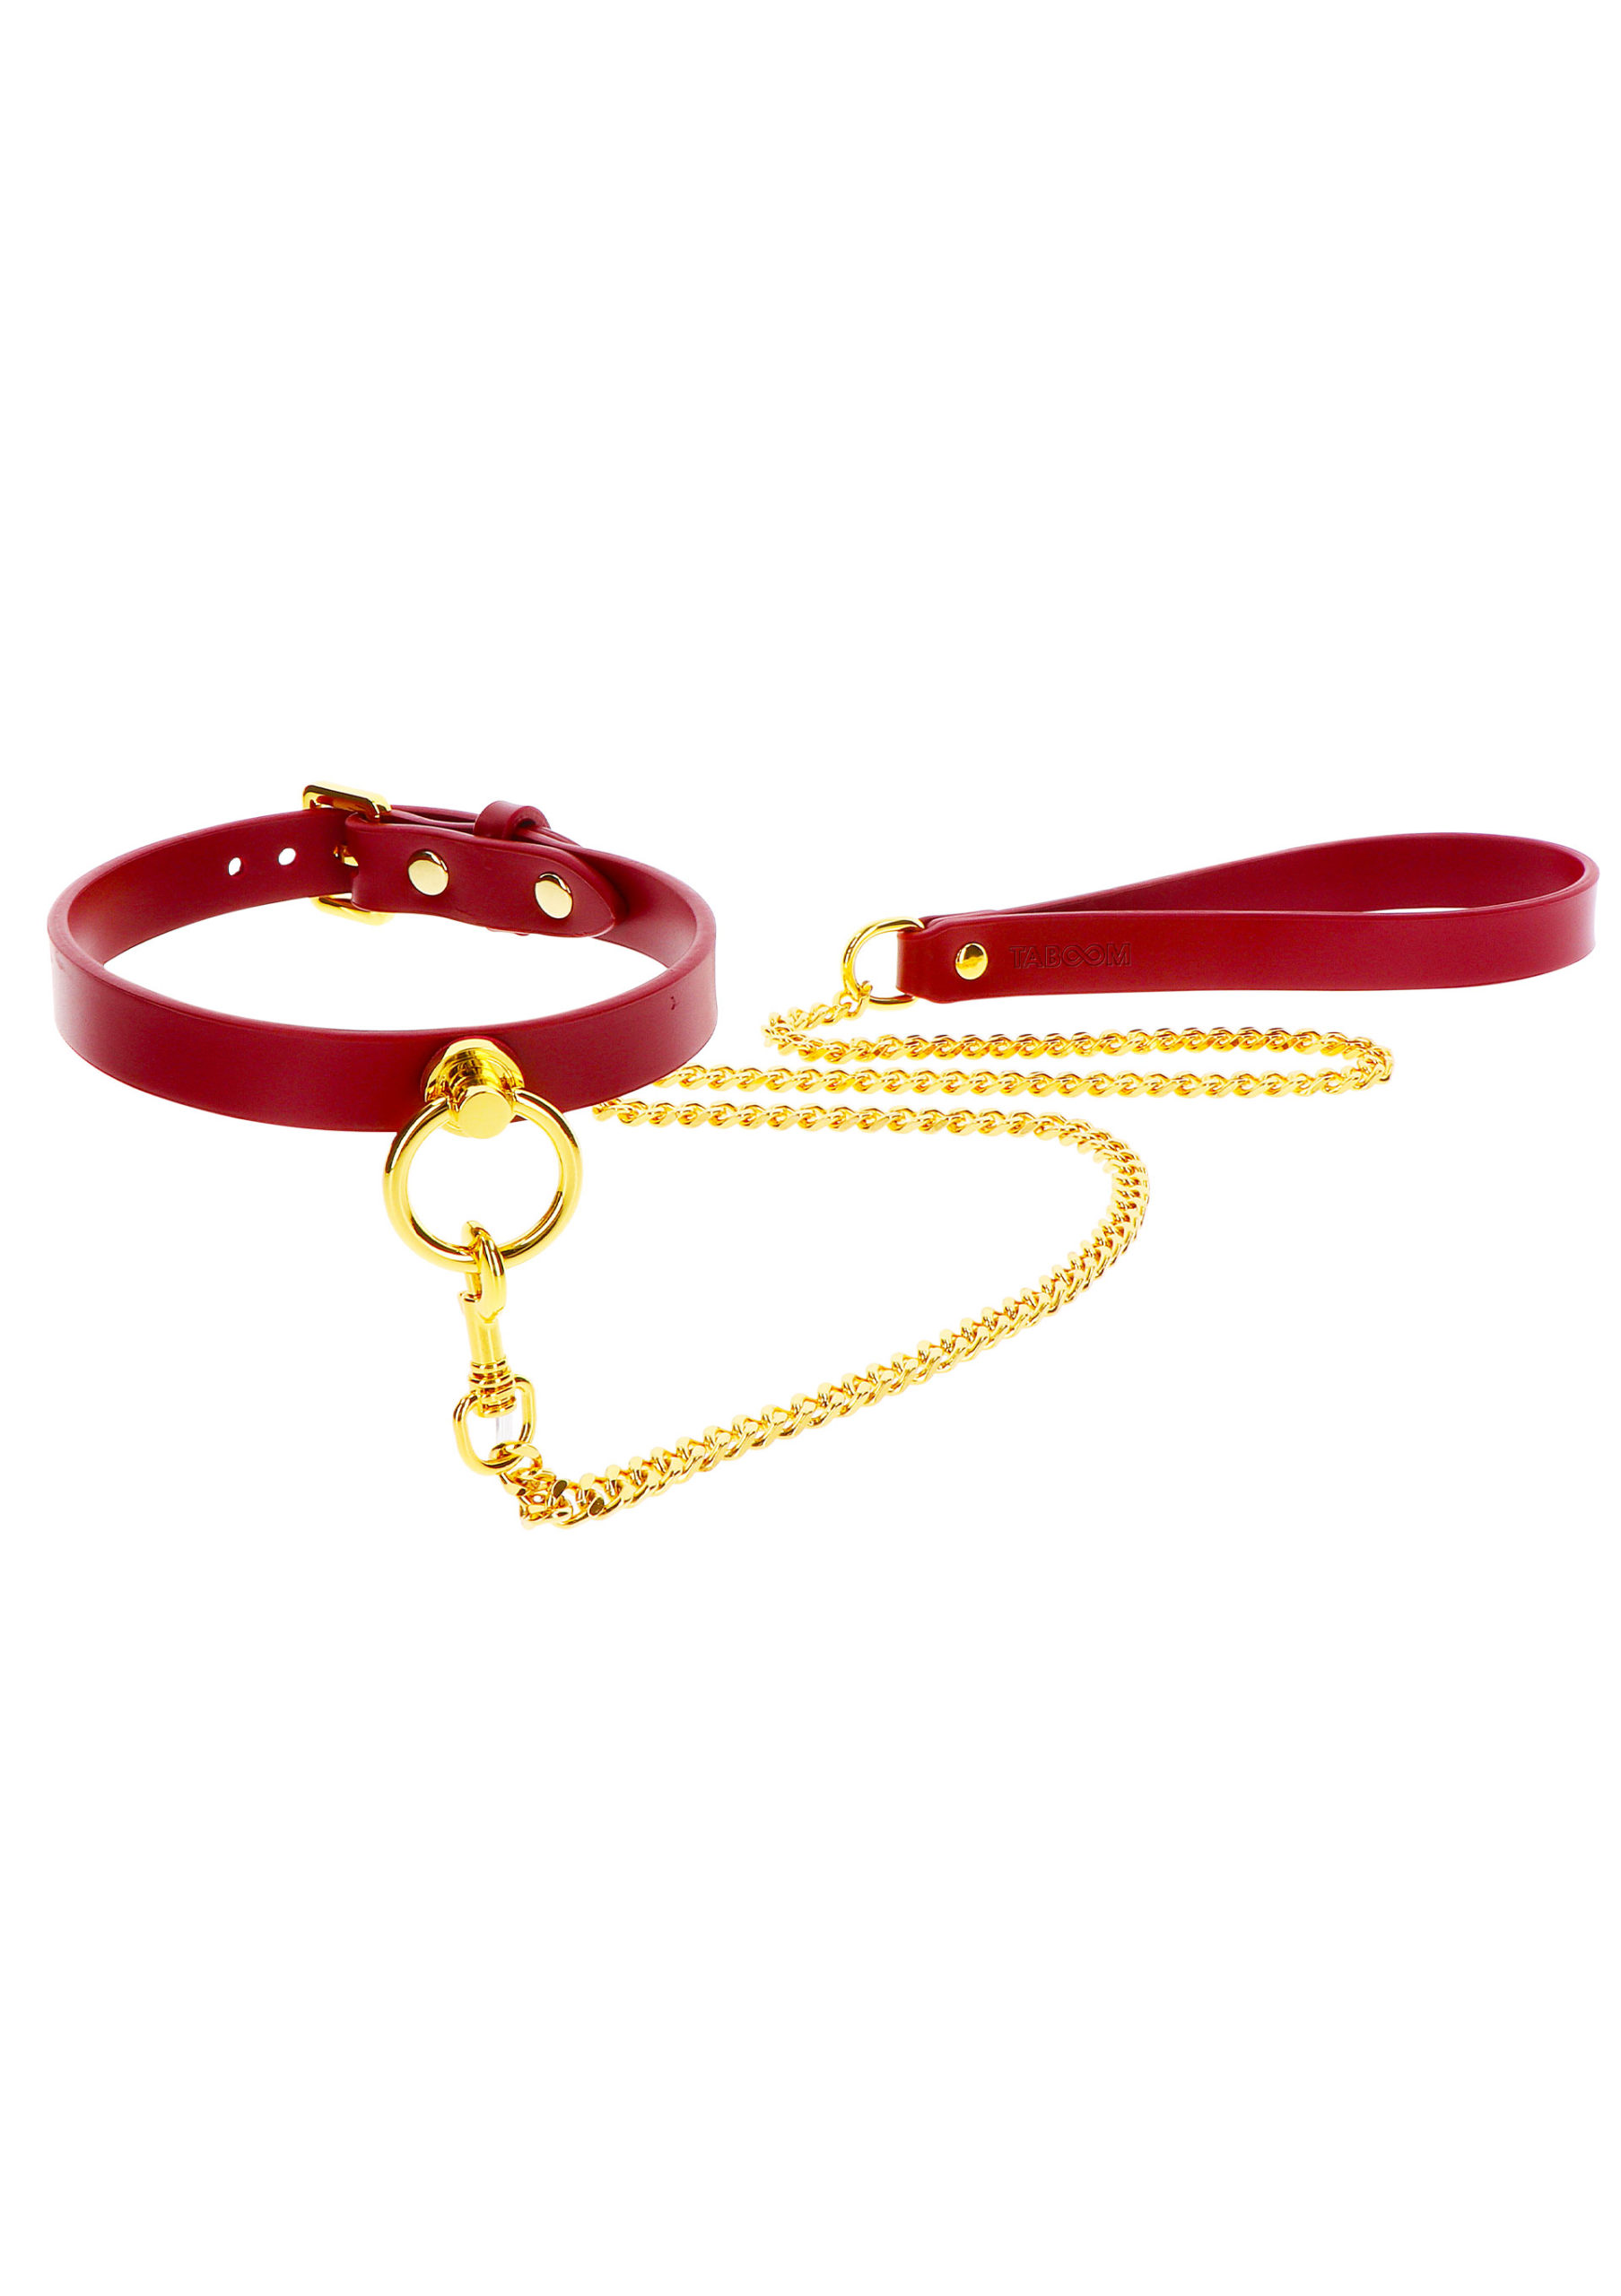 O-Ring Collar and Chain Leash